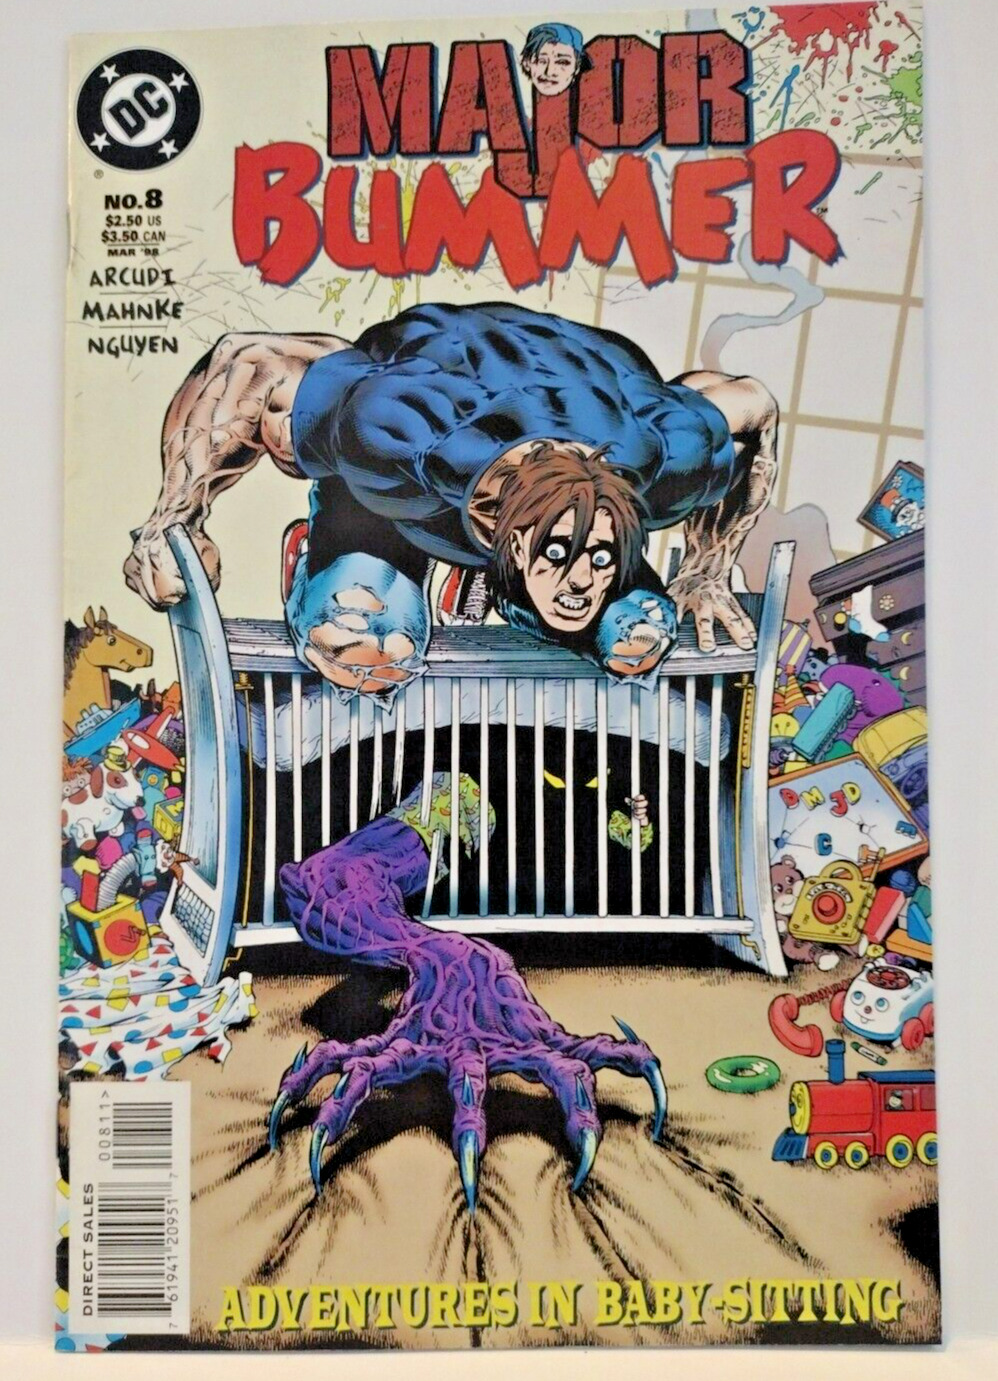 Major Bummer #8 in amazing condition -  March 1998 DC comics